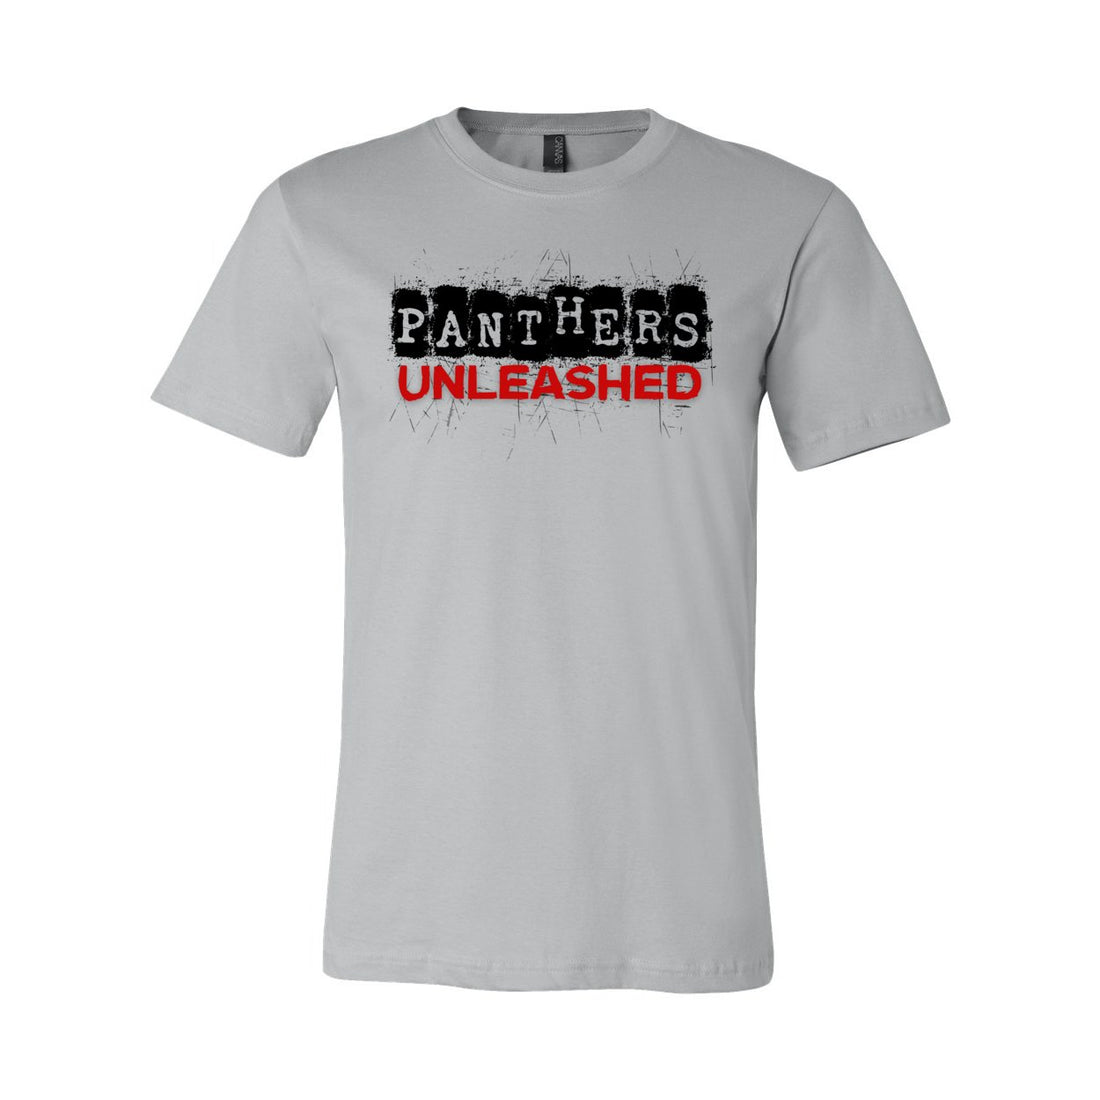 Panthers Unleashed Short Sleeve Jersey Tee - T-Shirts - Positively Sassy - Panthers Unleashed Short Sleeve Jersey Tee